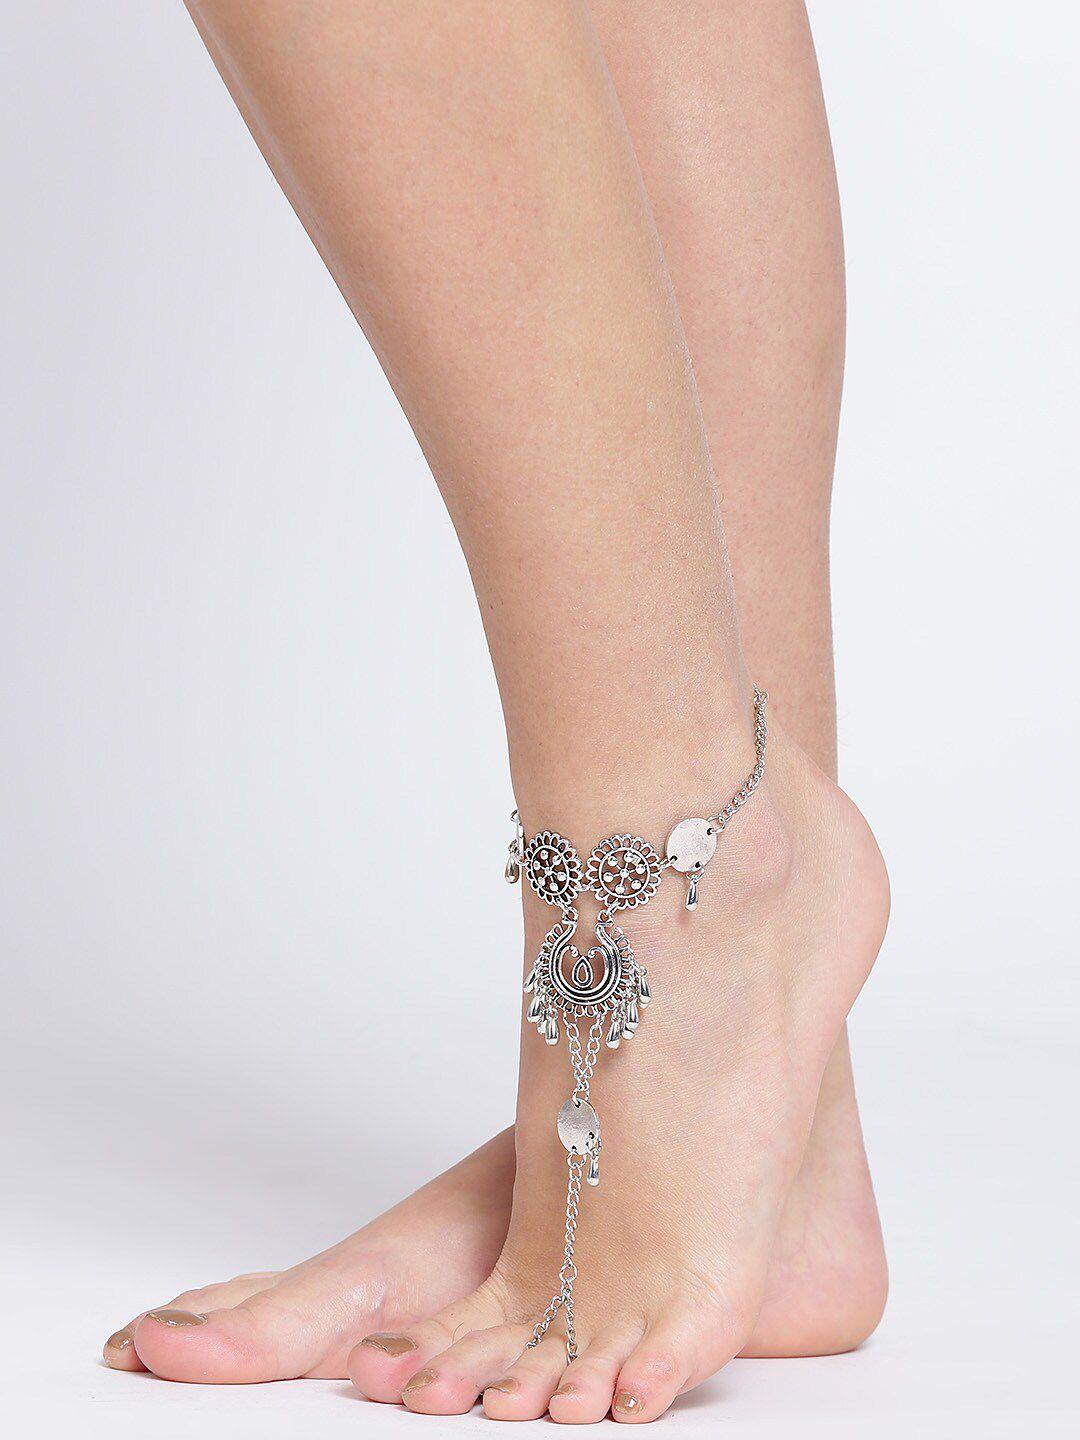 oomph silver-toned bohemian toe-ring anklet